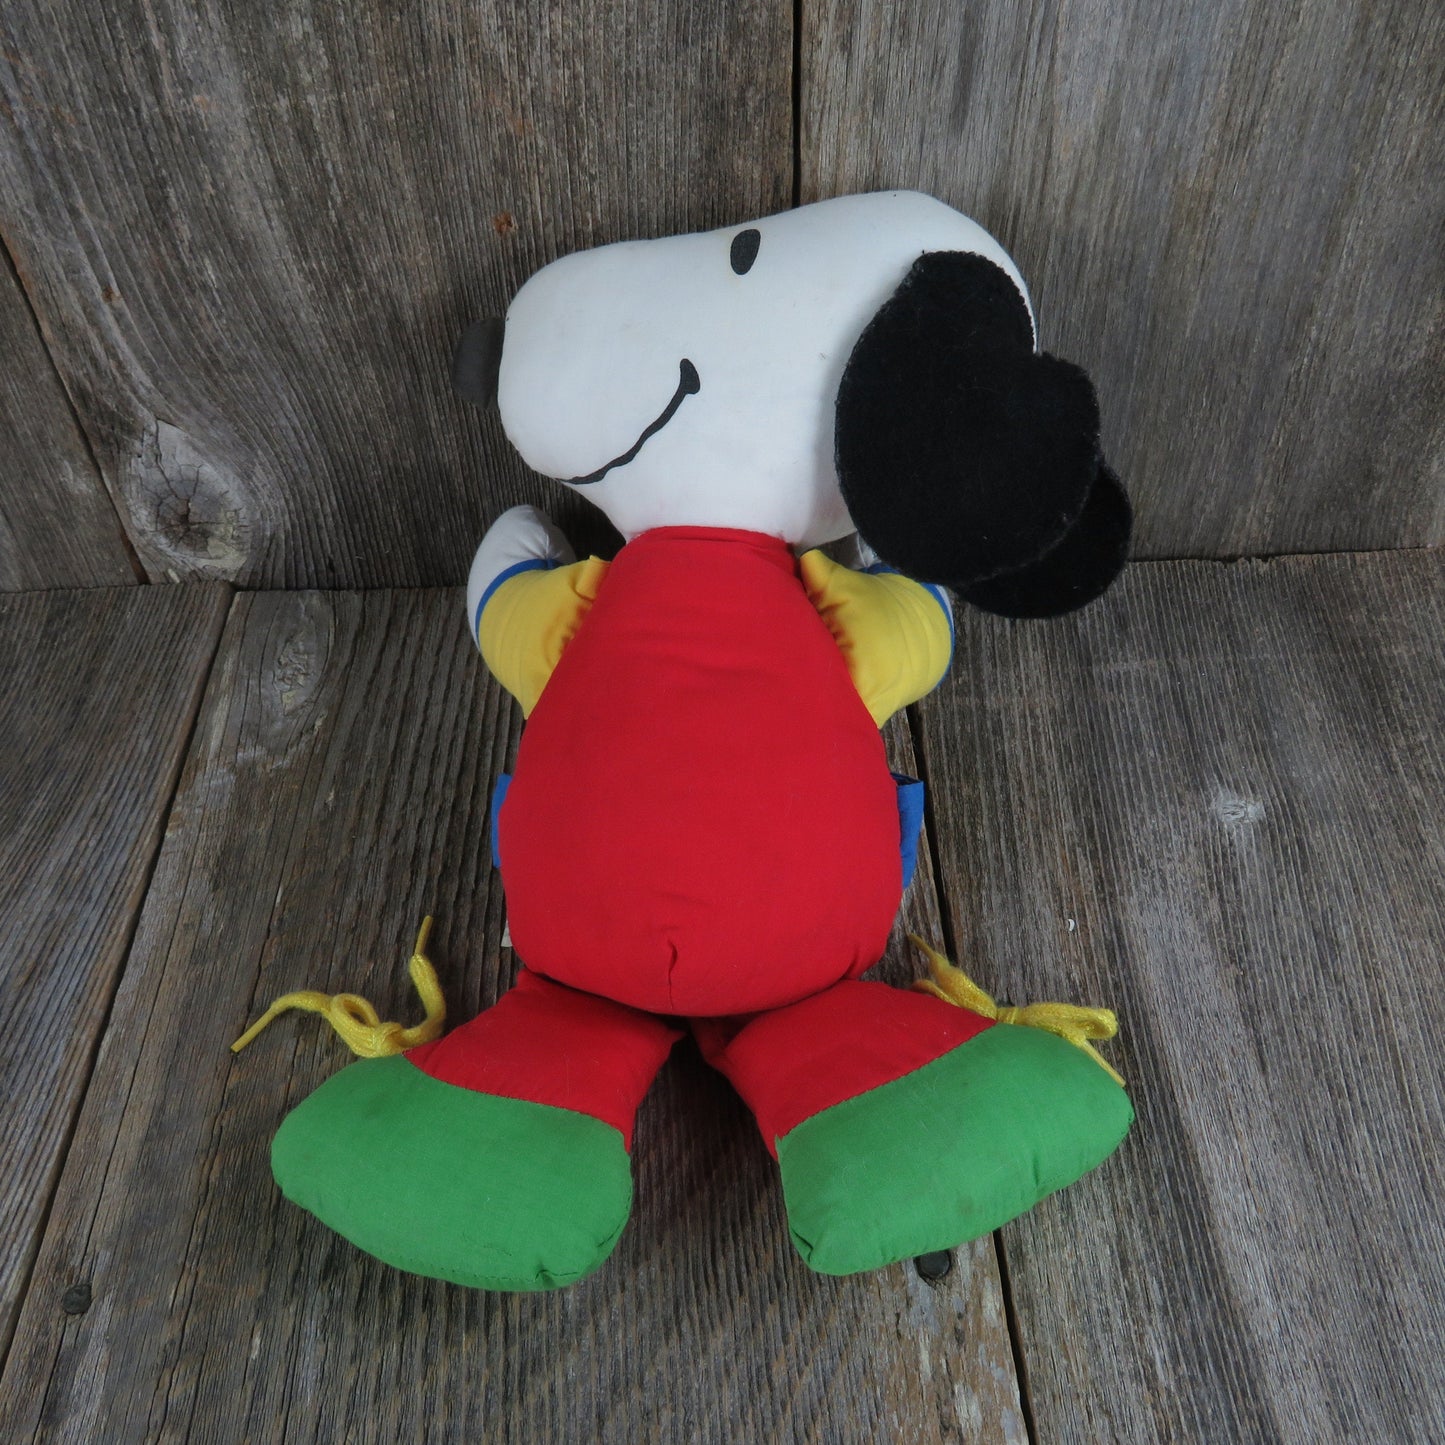 Vintage Snoopy Learning Plush Red Yellow Zipper Buttons Colors Numbers Buckle Shoe Tying Stuffed Animal